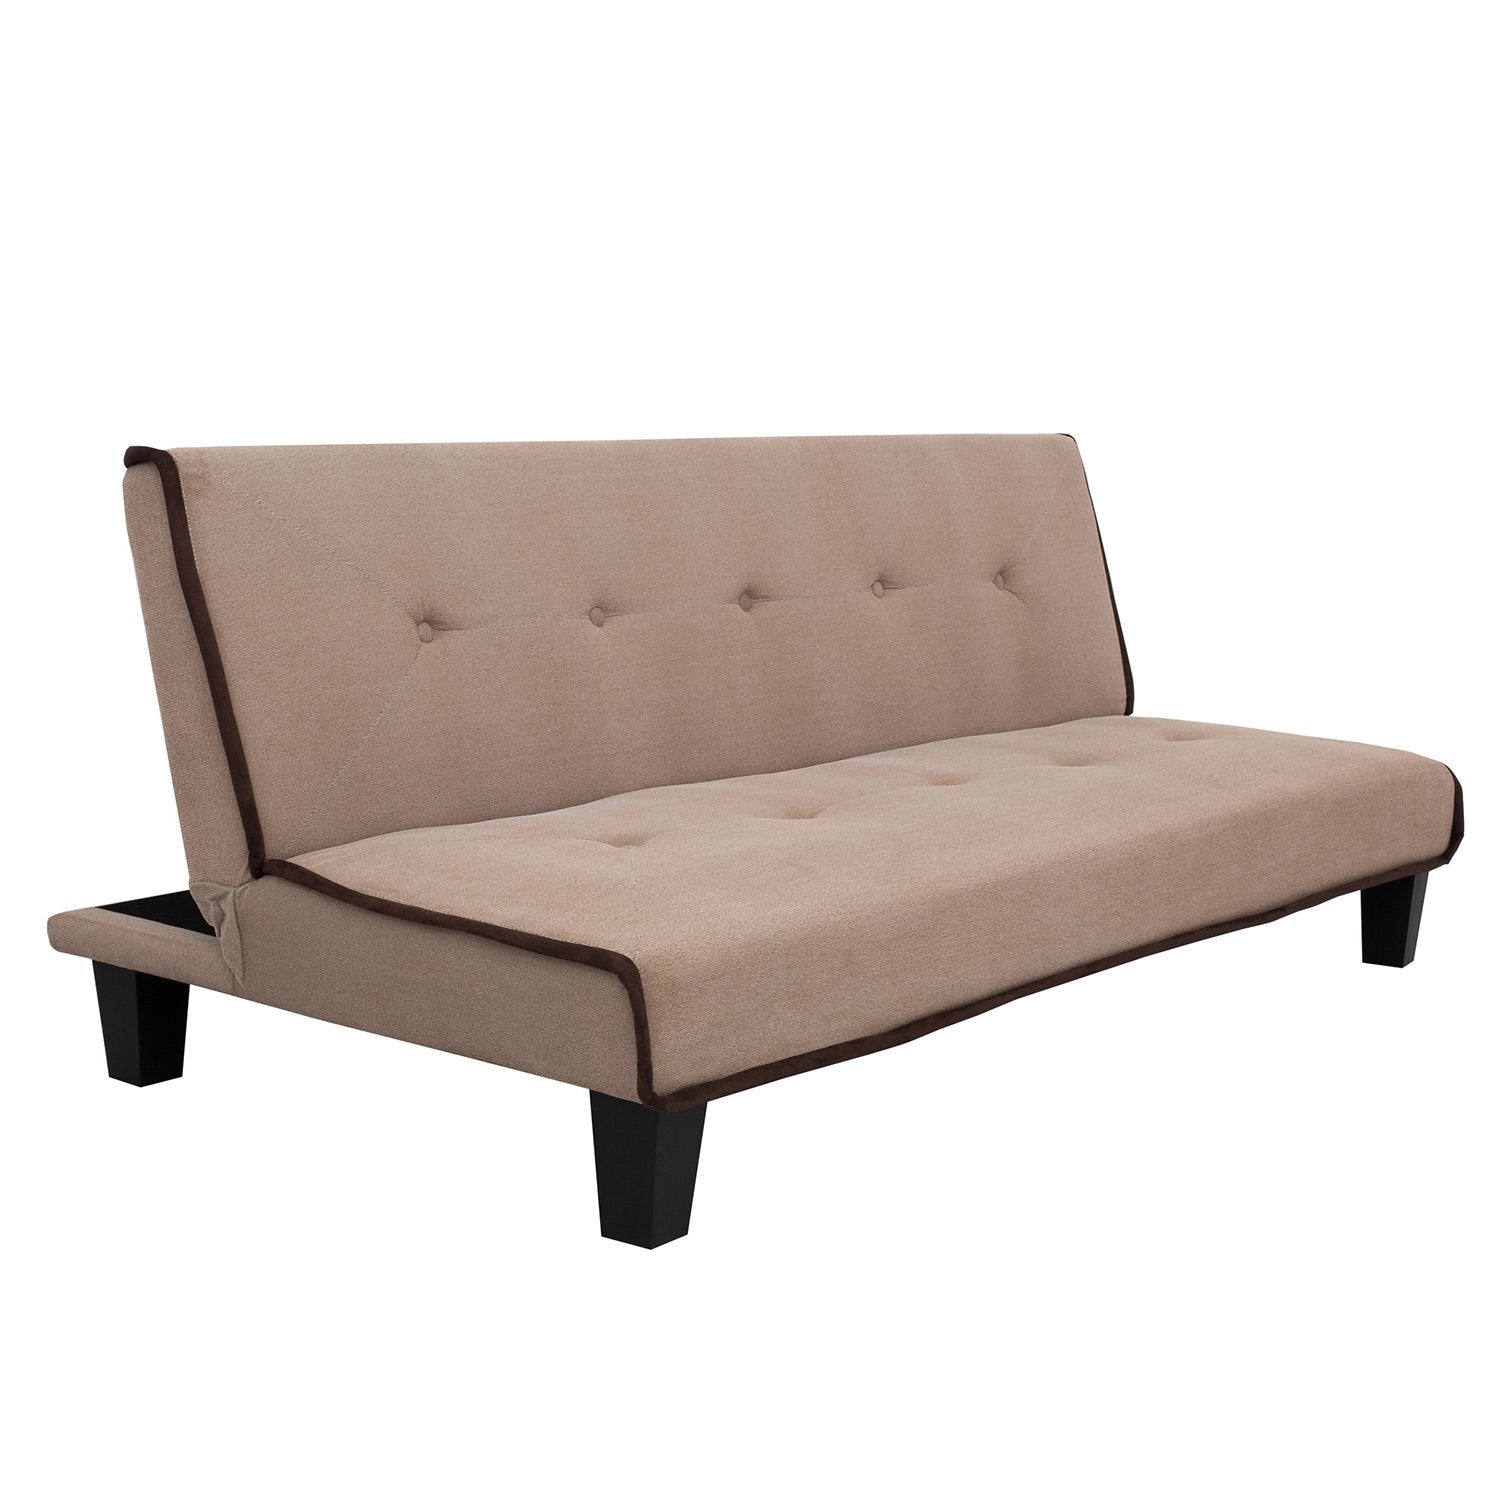 71.3 in. Convertible Armless Sofa Bed in Brown